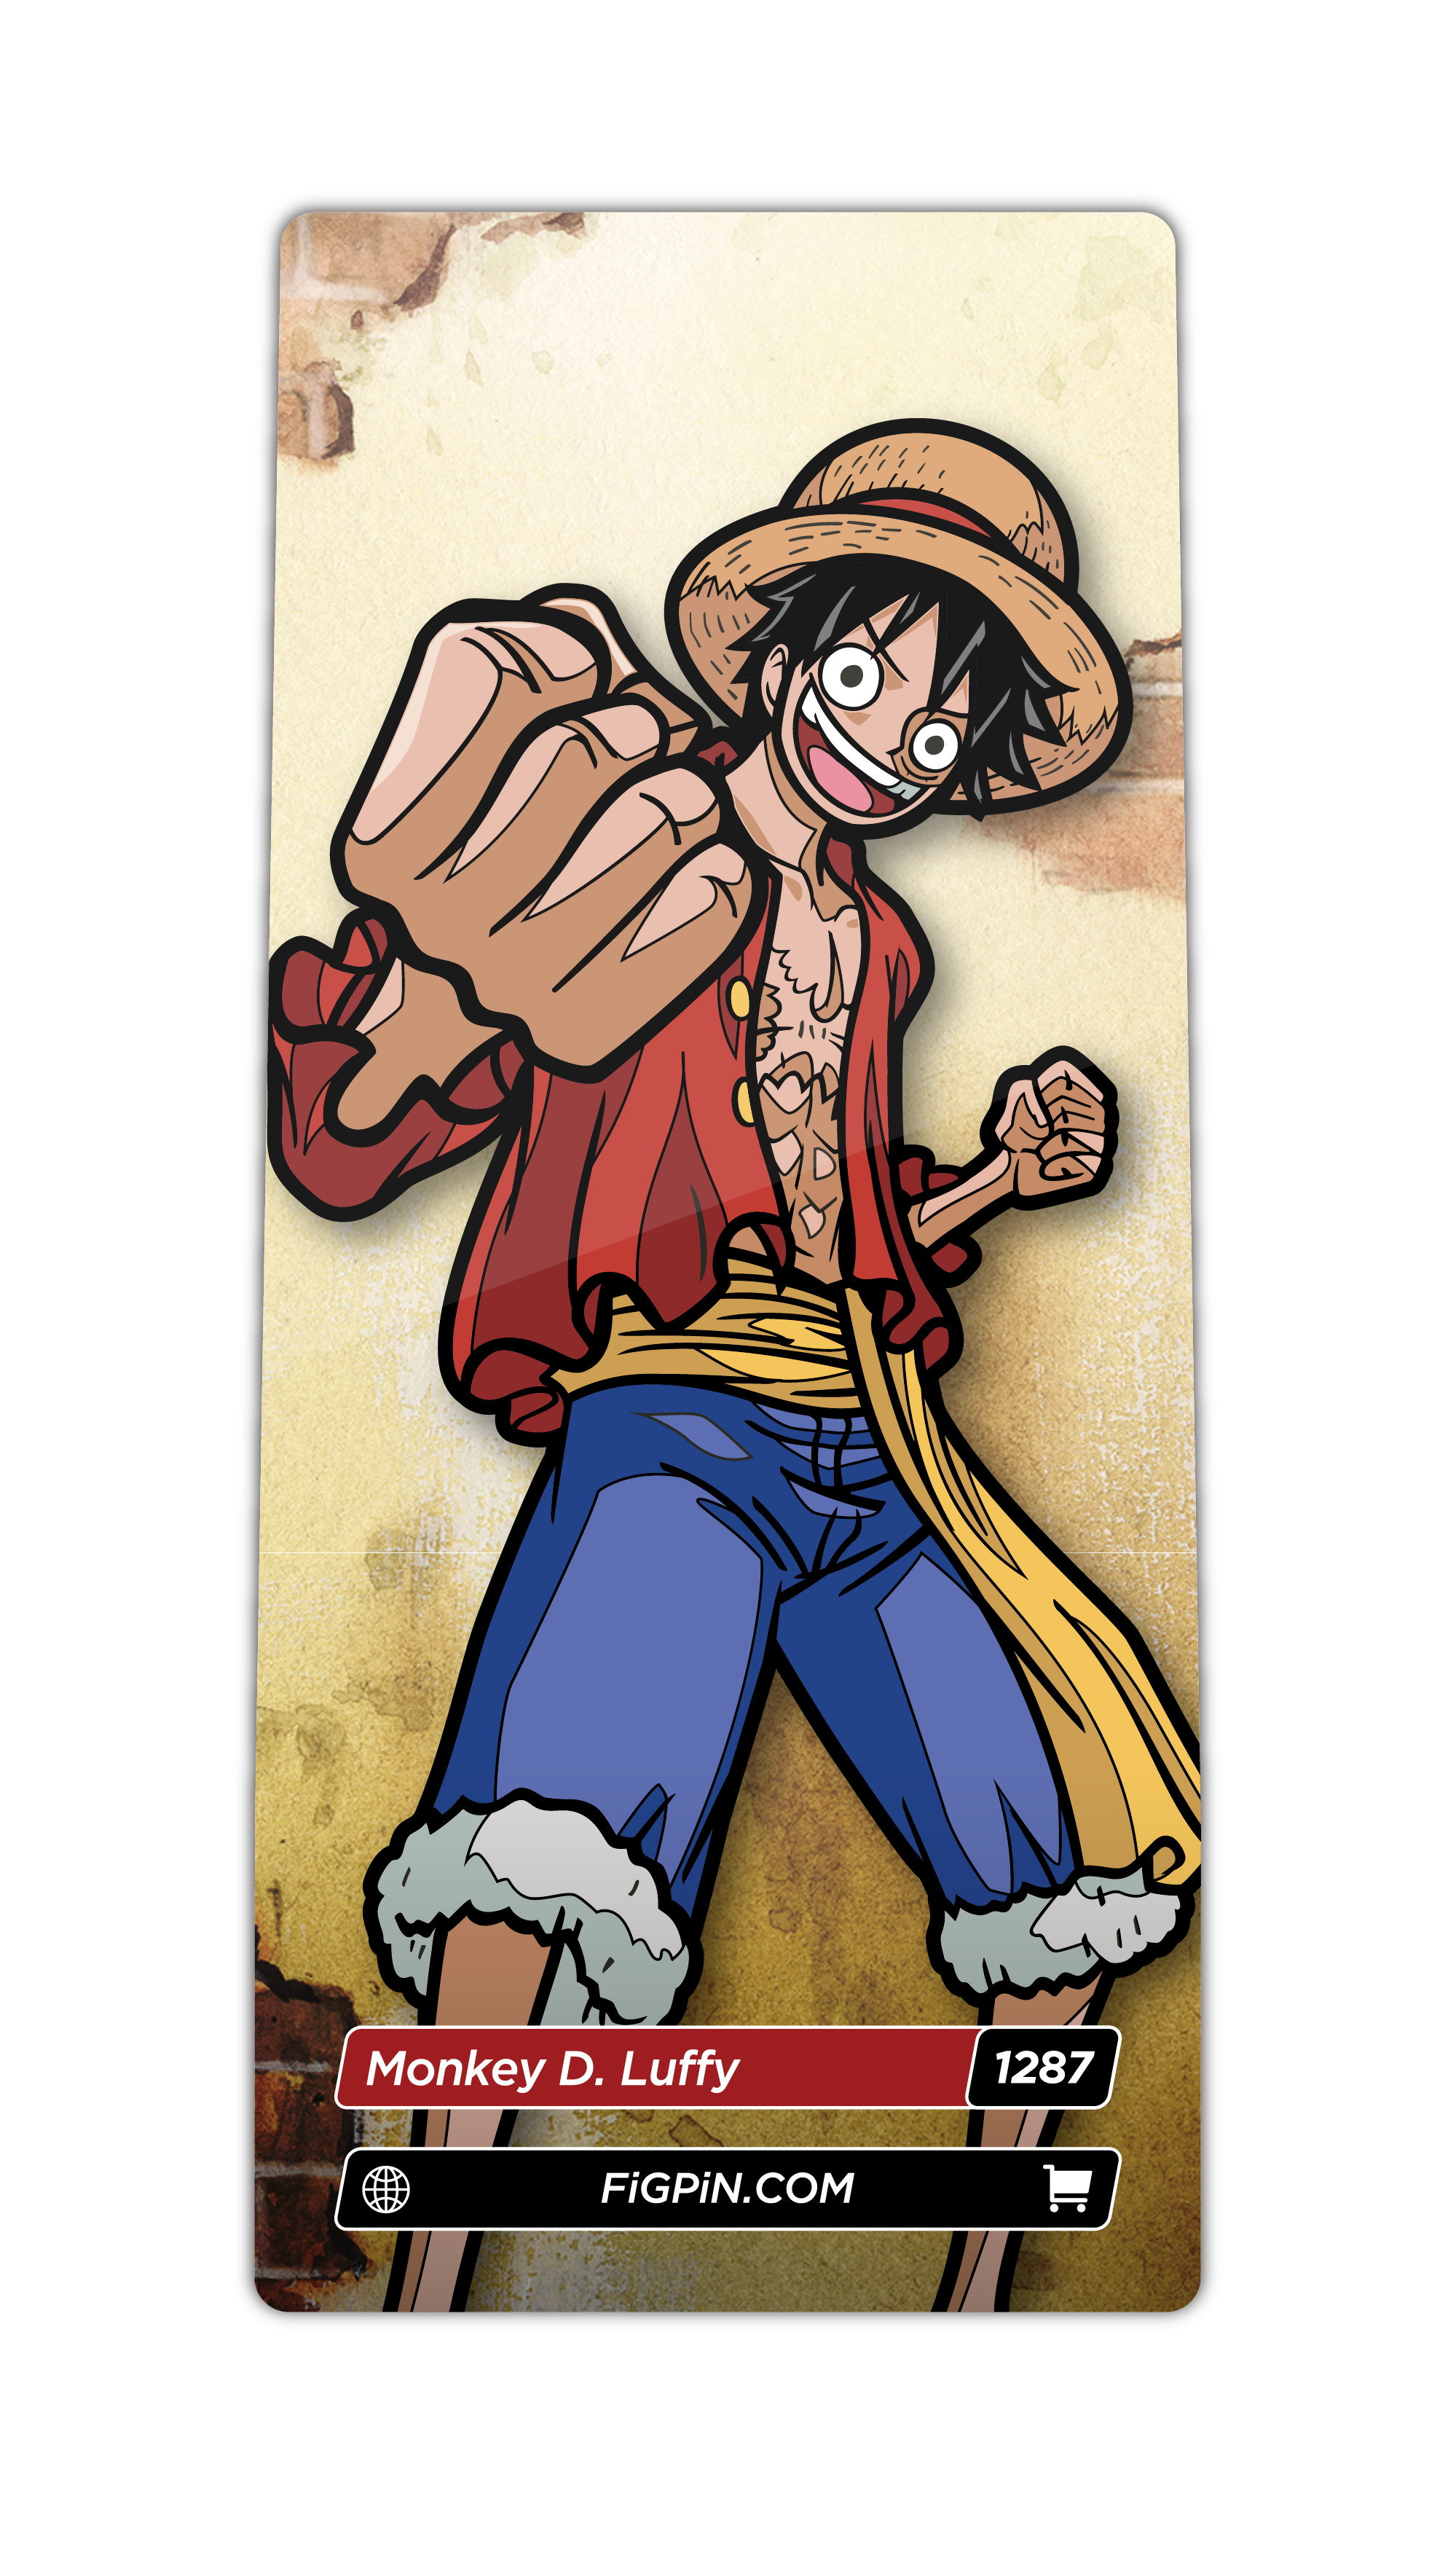 Character card of One Piece's Monkey D. Luffy with text “Monkey D. Luffy (1287)” and link to FiGPiN’s website